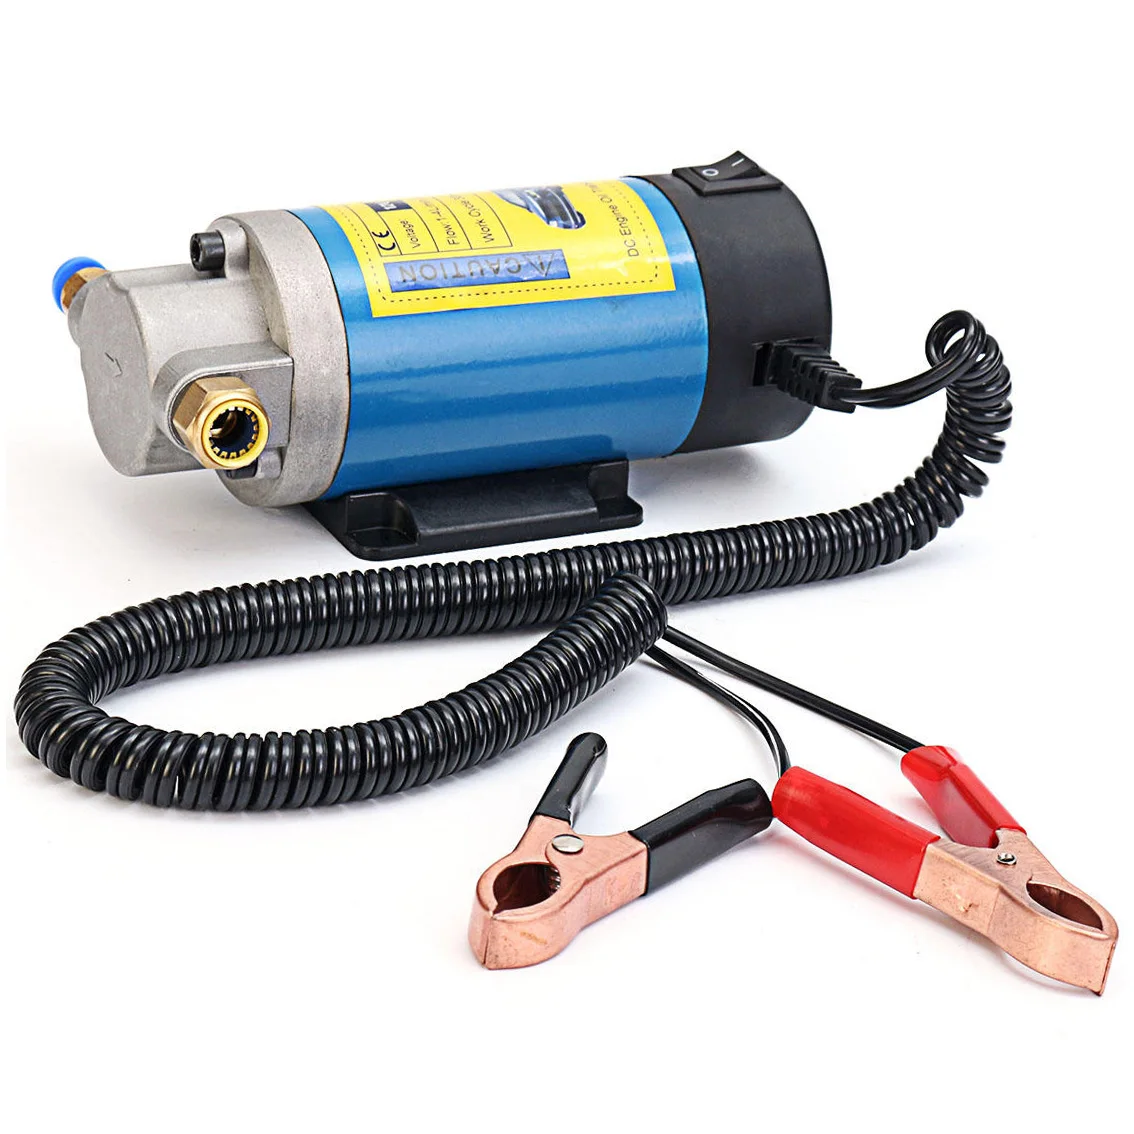 12V 100W Car Electric Oil Extractor Pump Oil Transfer Pump,Gear pump,Low Noise,Equipped With Four Inlet and Outlet Pipes,Suitable for Cars,Boats Work With Diesel or Engine Oil 